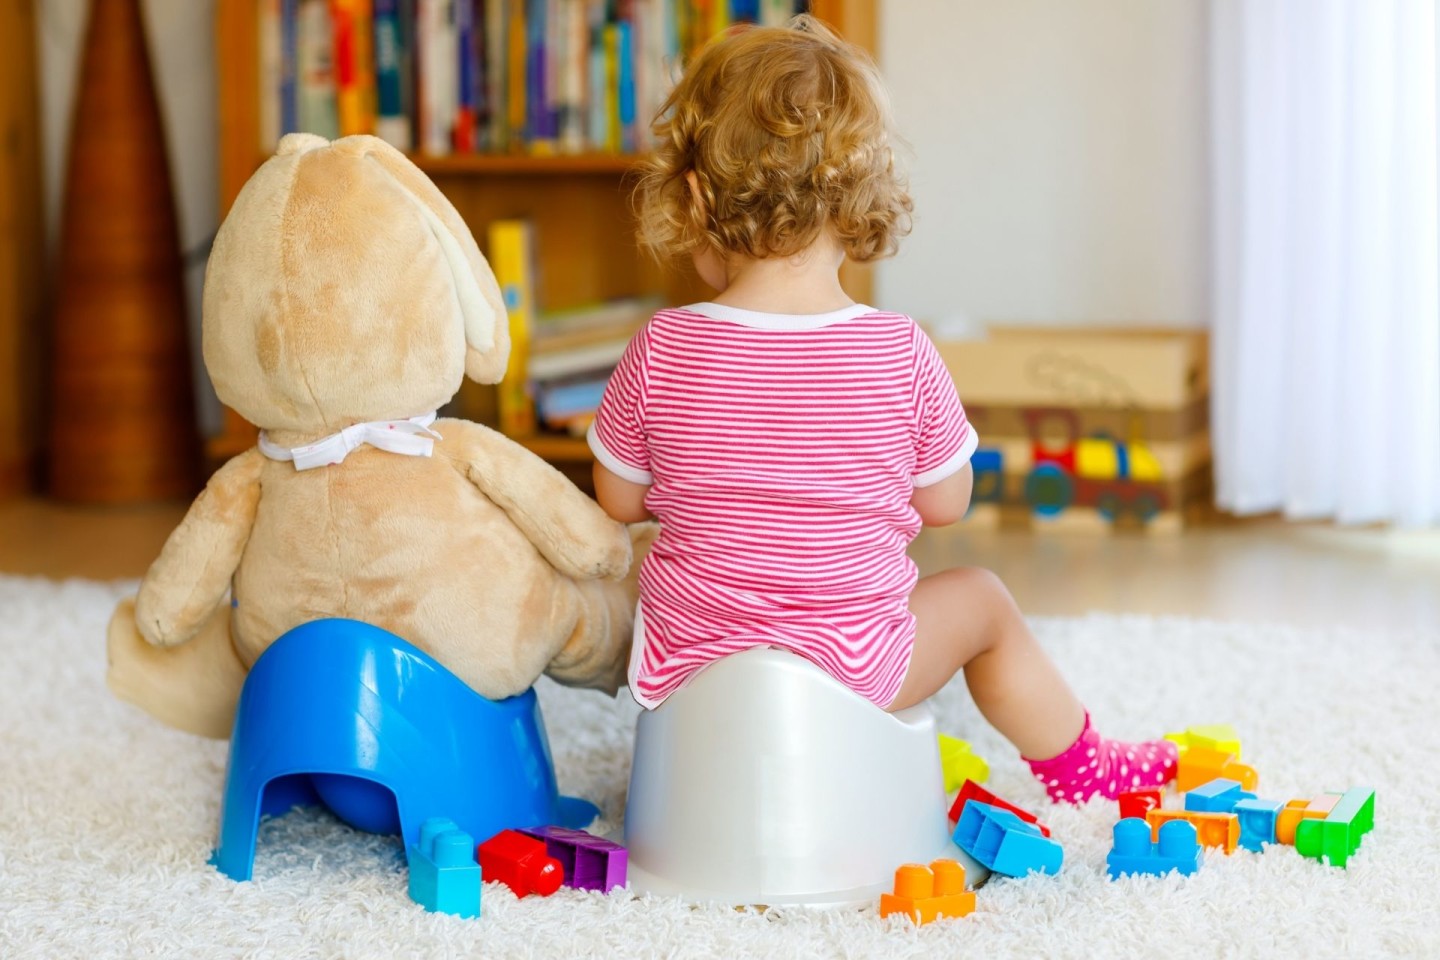 Toddler sitting on potty with stuffed animal sitting on play potty beside her